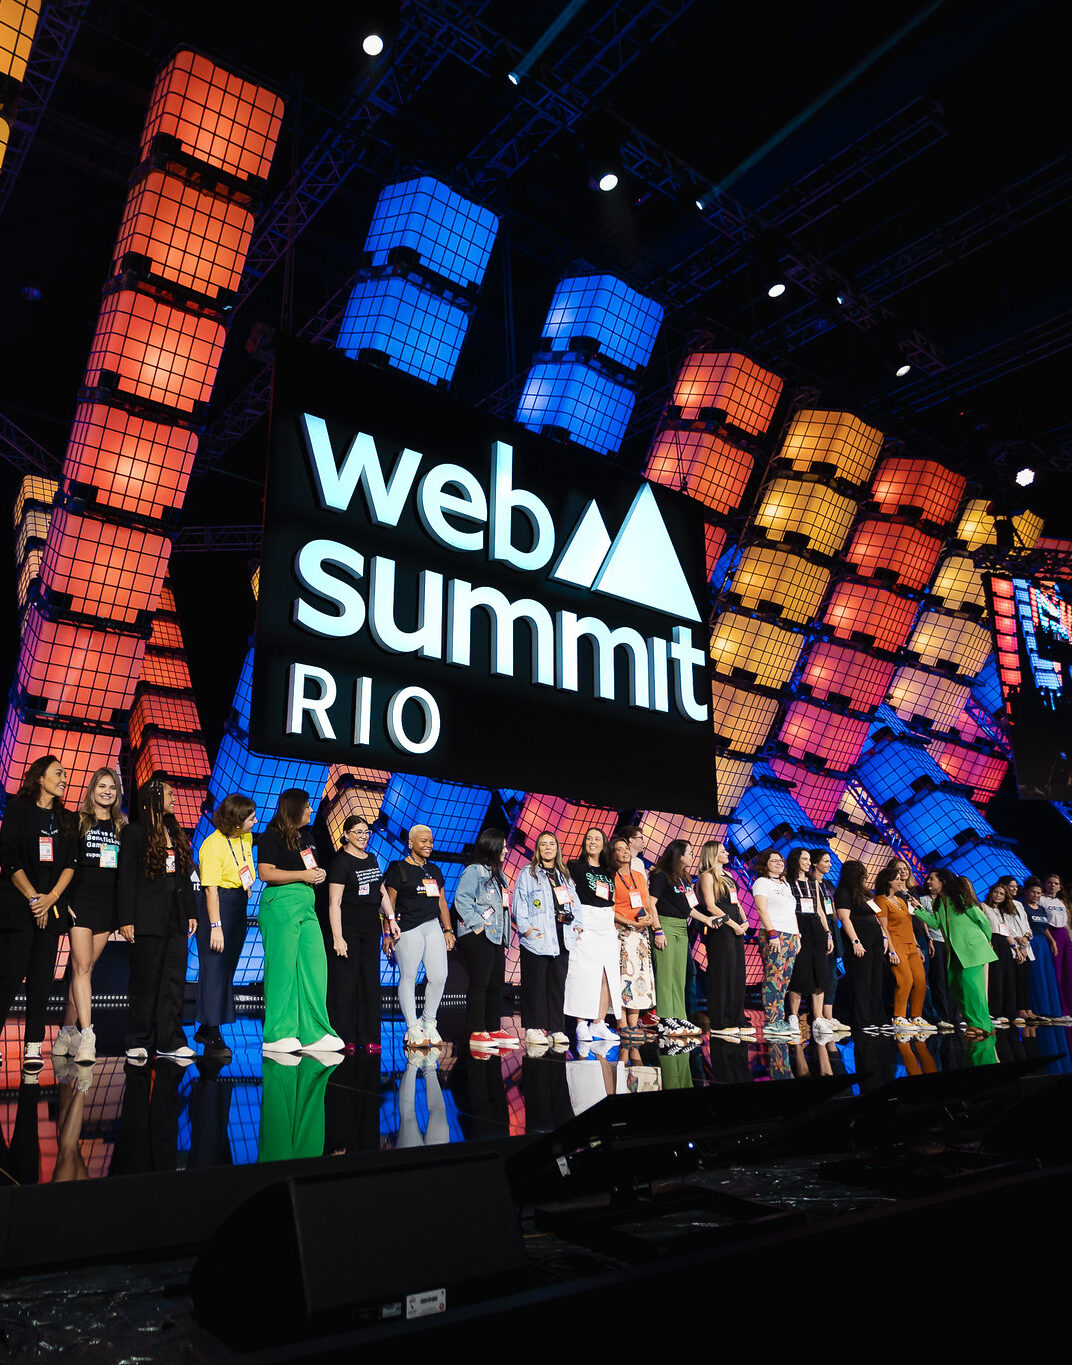 Photograph of women founders on Center Stage at Web Summit Rio. There is a row of women standing on stage with the Web Summit Rio logo lit up behind them.